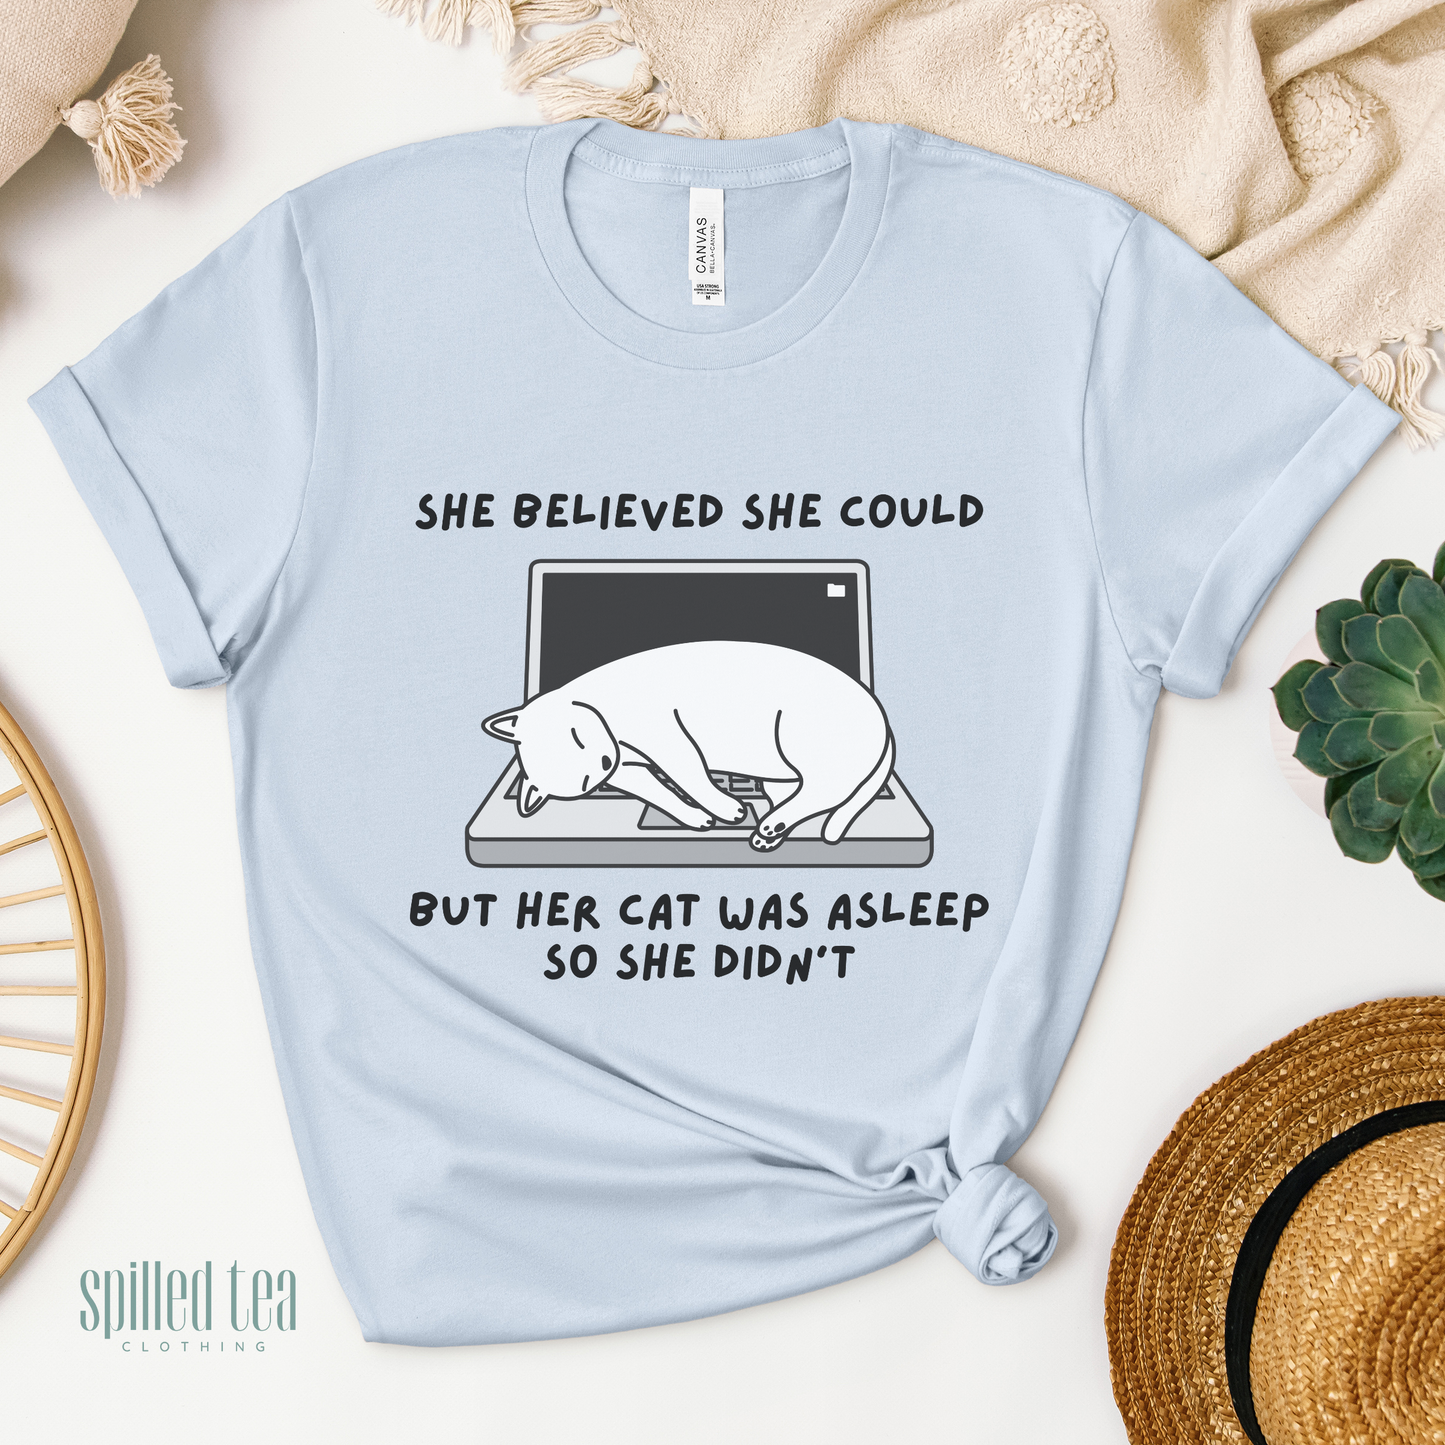 She Believed She Could, But T-Shirt